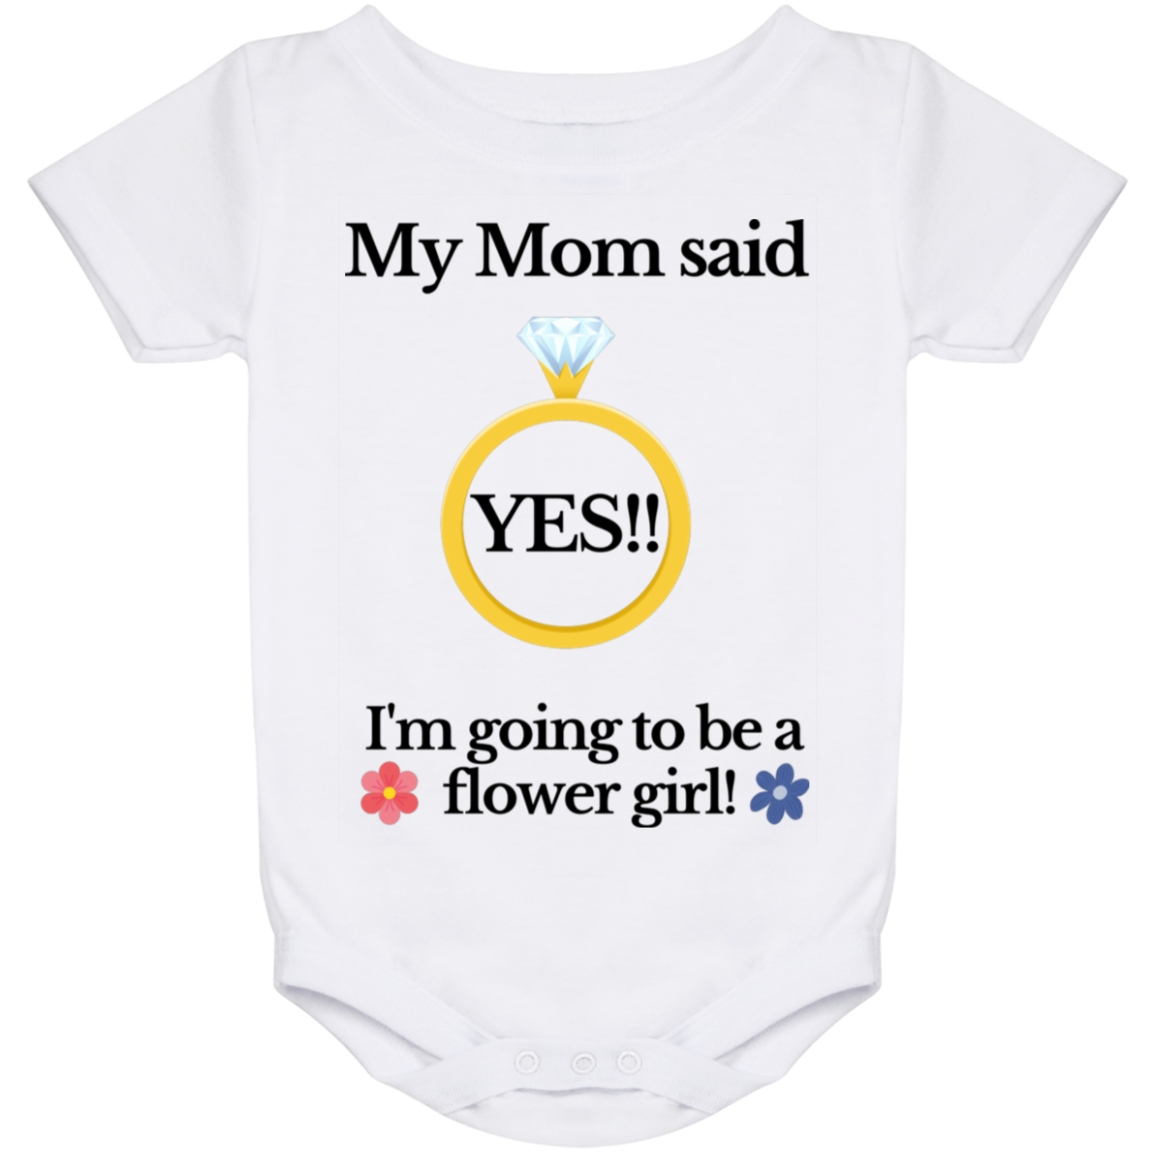 My mom said yes! I'm going to be a flower girl onesie